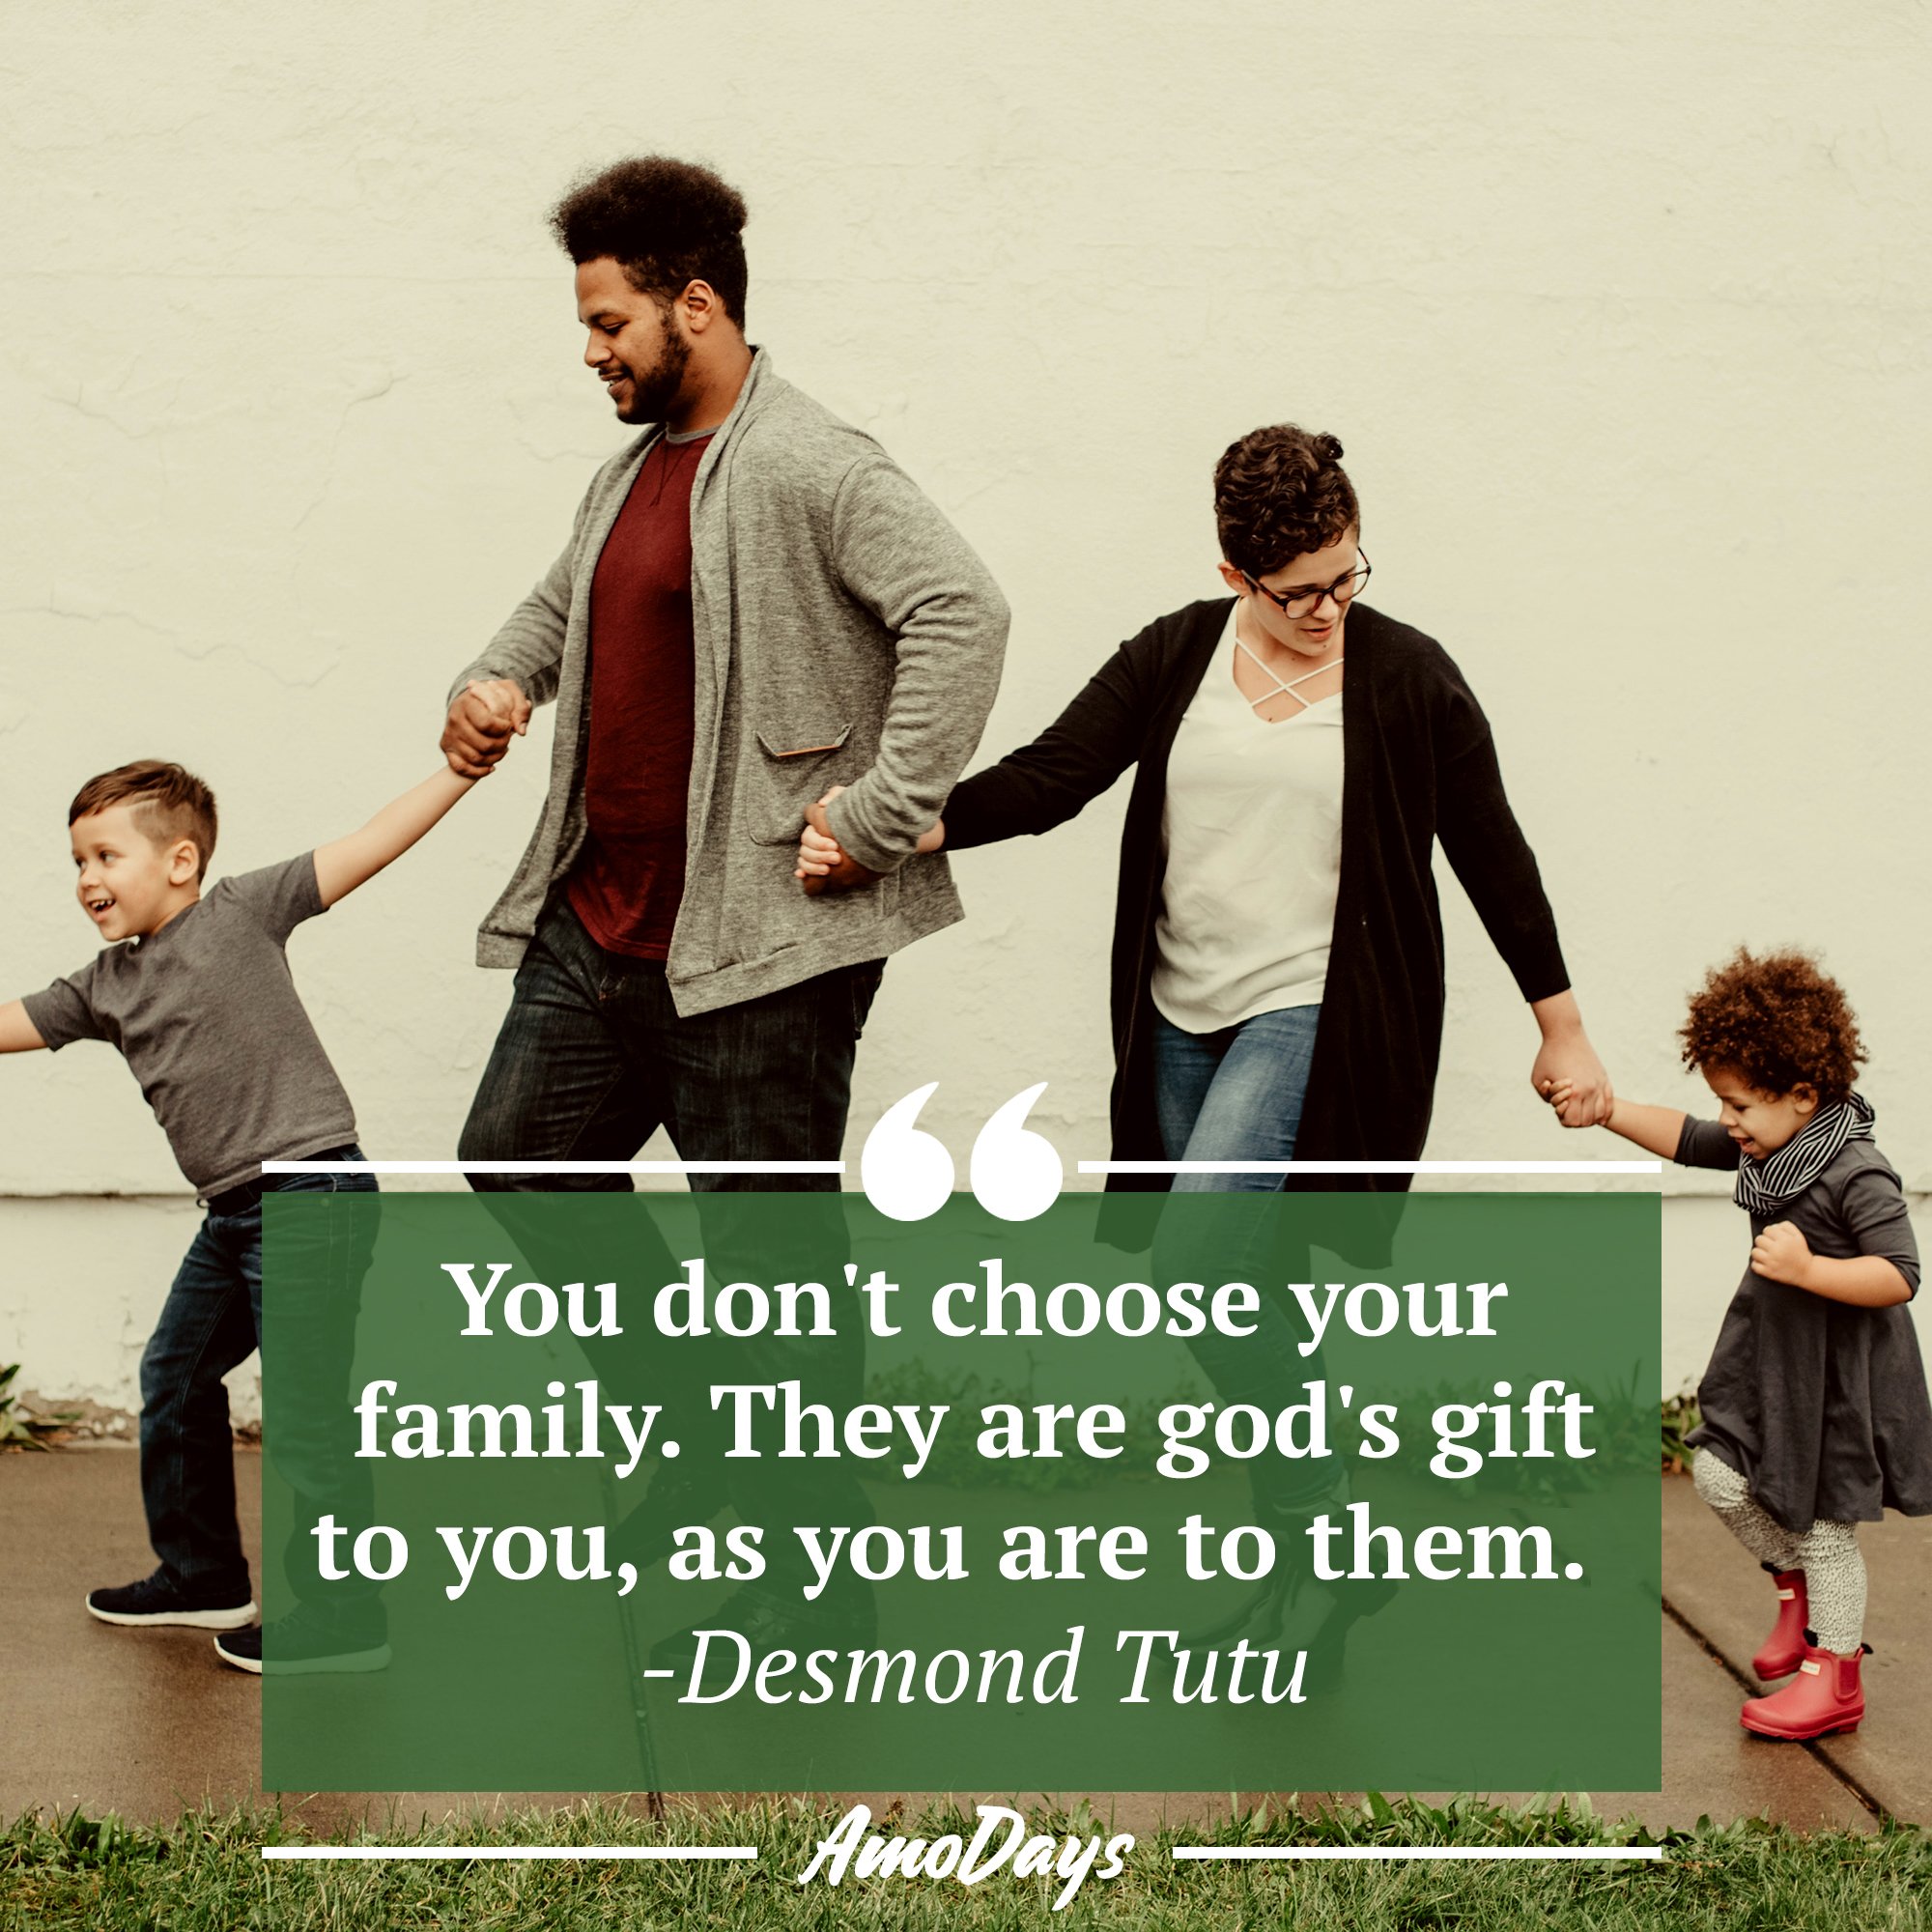 Desmond Tutu's quote: You don't choose your family. They are god's gift to you, as you are to them." | Image: AmoDays